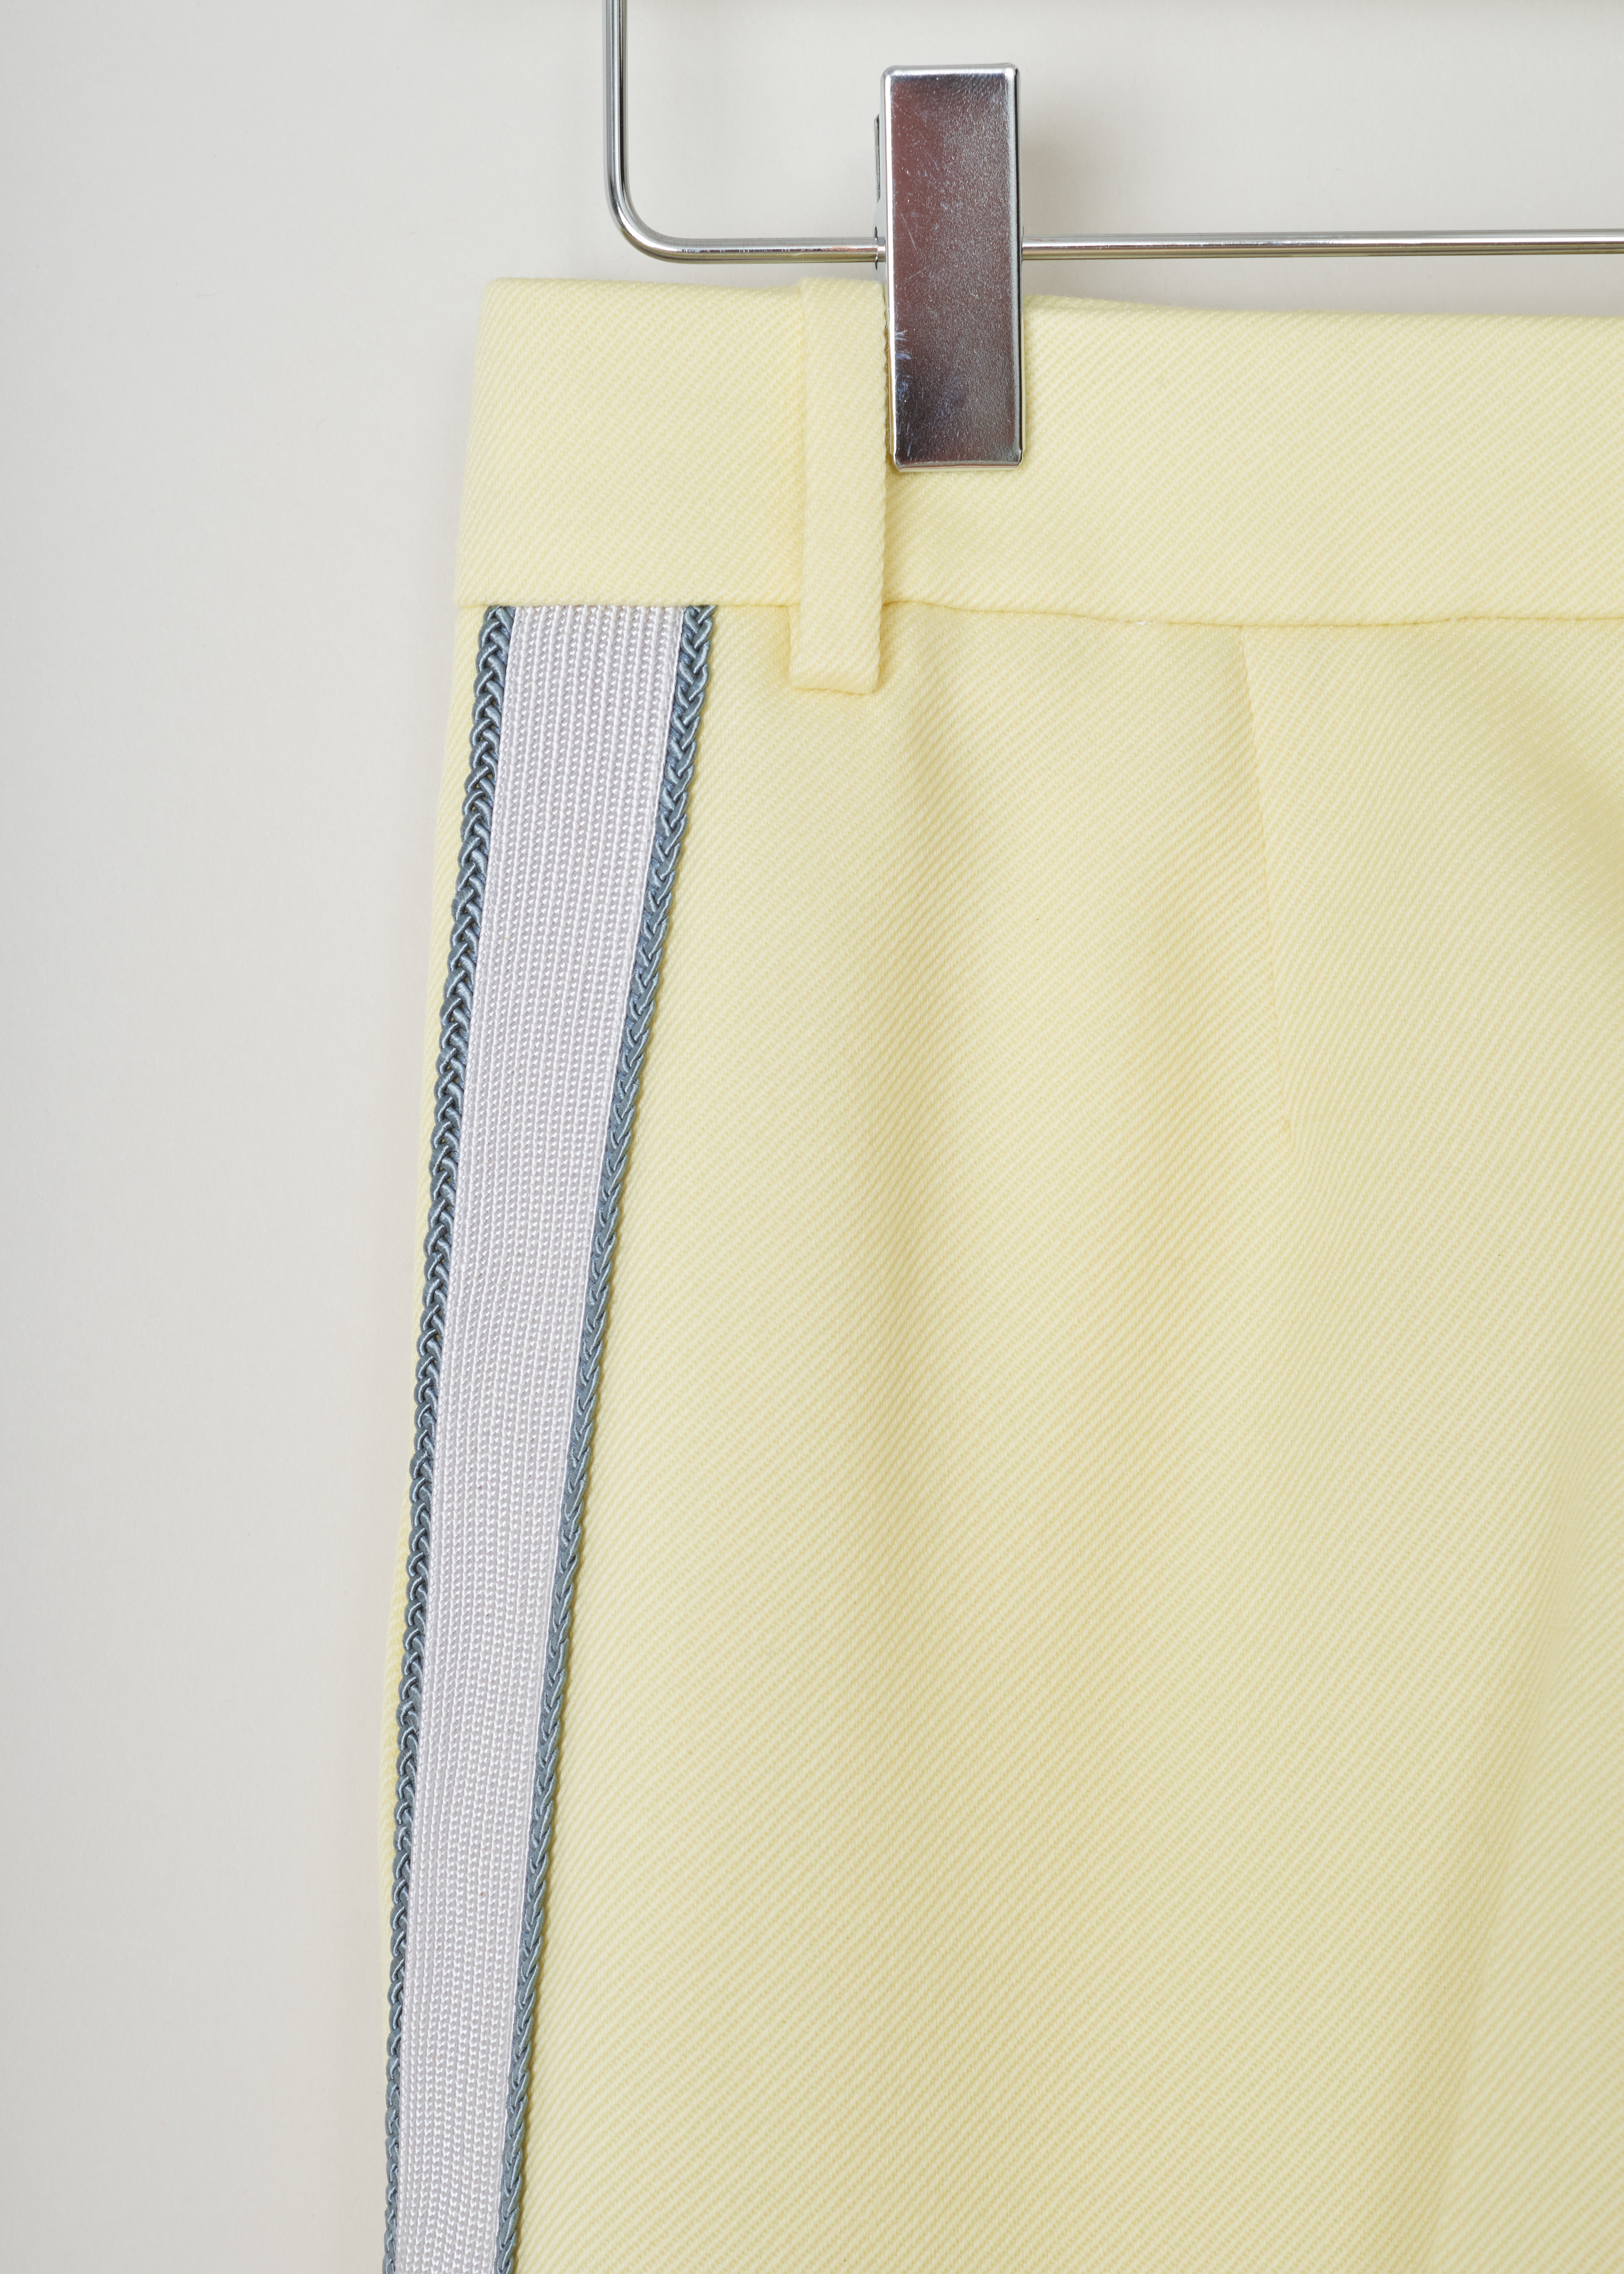 Calvin Klein 205W39NYC Yellow pants with ribbon trim 84WWPB22_W037_764 light yellow pearl detail. Yellow trousers with side piping in white and blue, centre creases, side pockets and a welt pocket on the back.